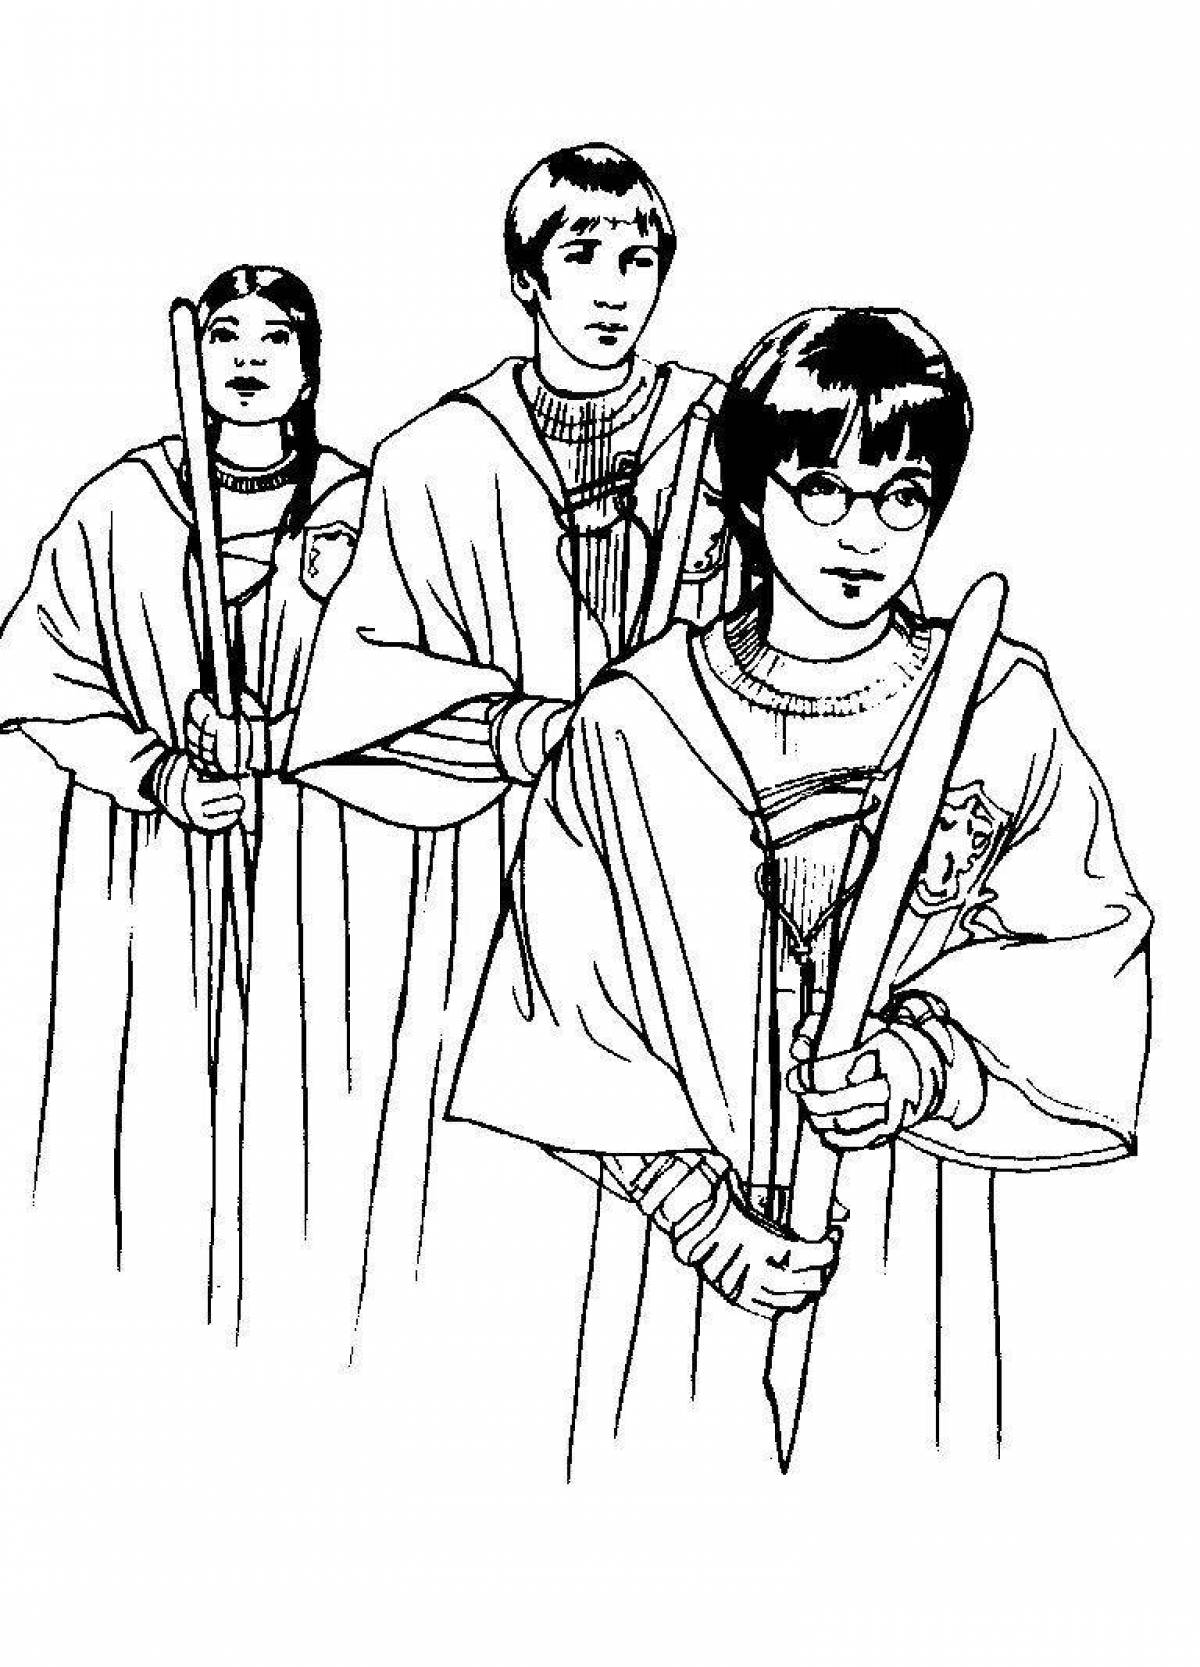 Fantastic harry potter and the philosopher's stone coloring book